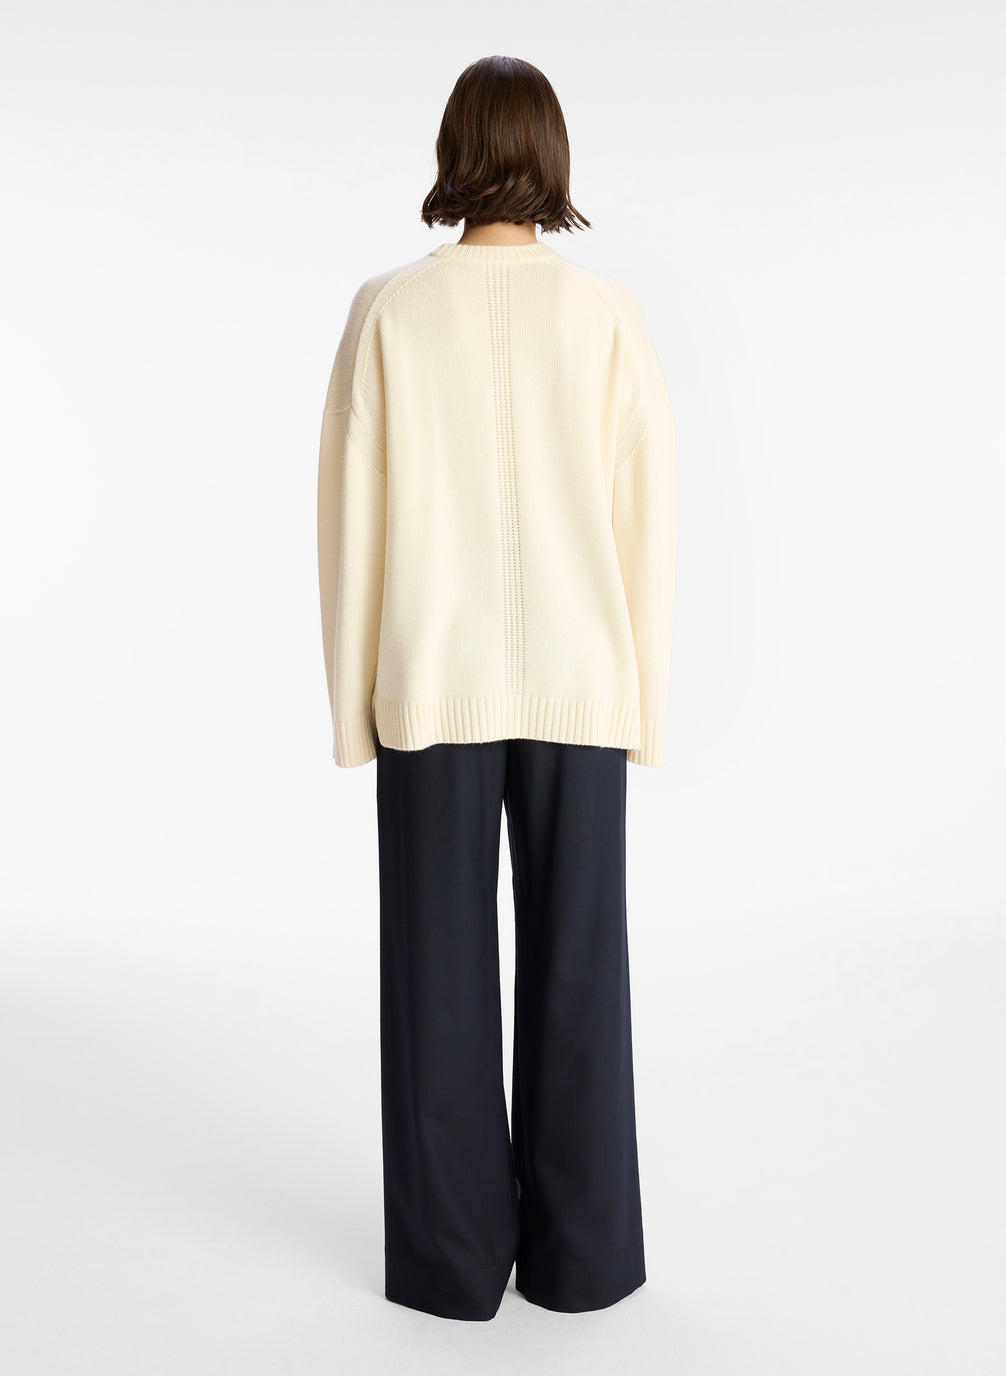 back view of woman wearing off white cashmere long sleeve sweater